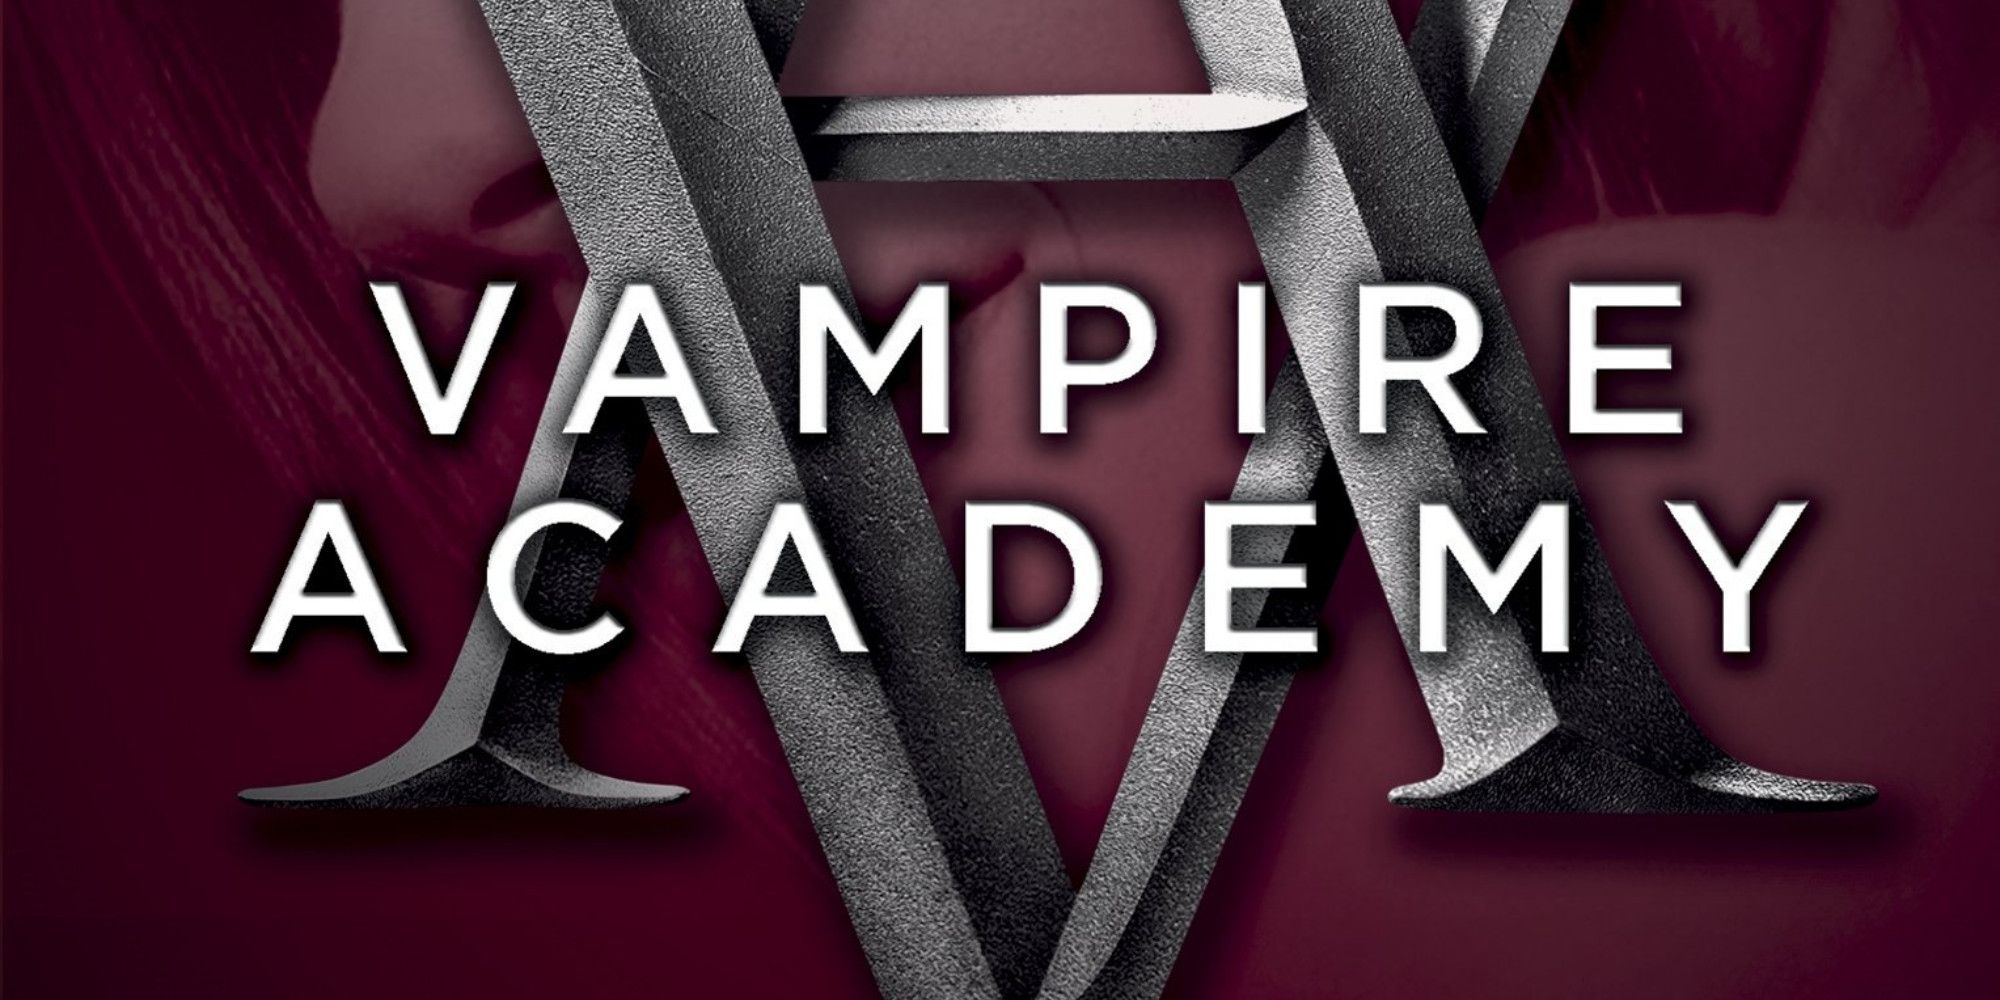 The Vampire Academy by Richelle Mead Book Cover